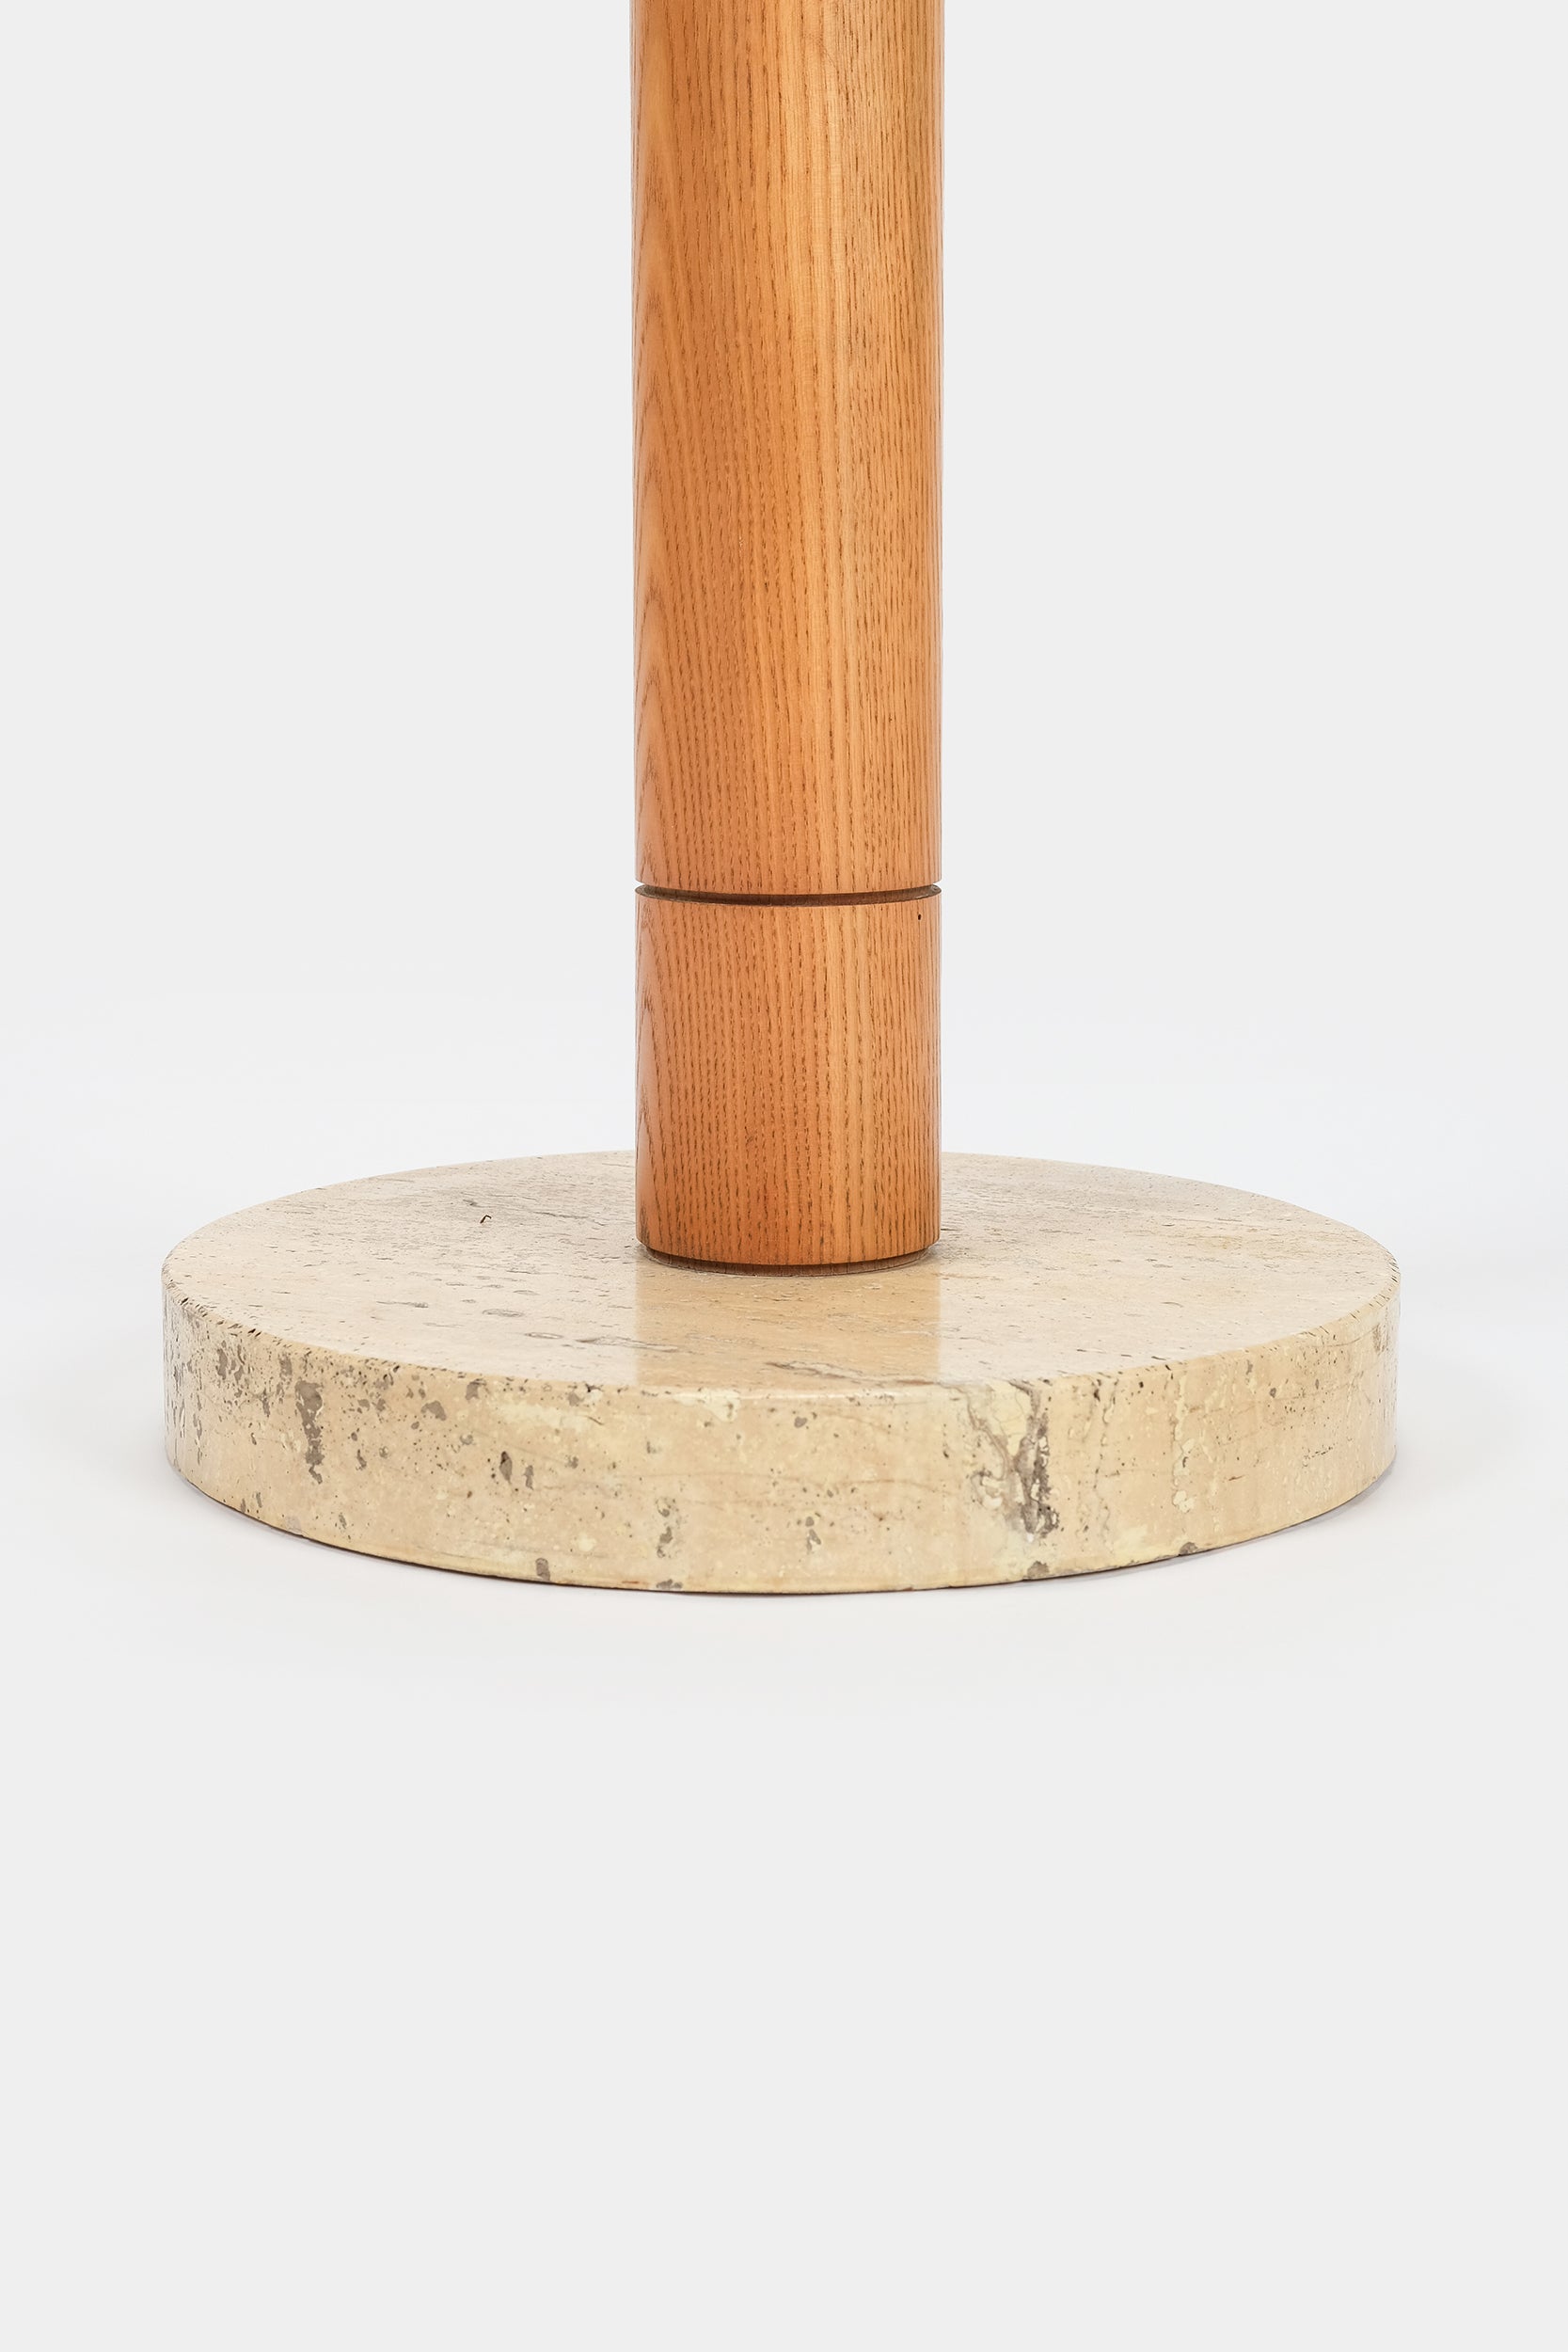 Ettore Sotsass, Coat Stand, Ashwood with Tavertin Foot, 70s